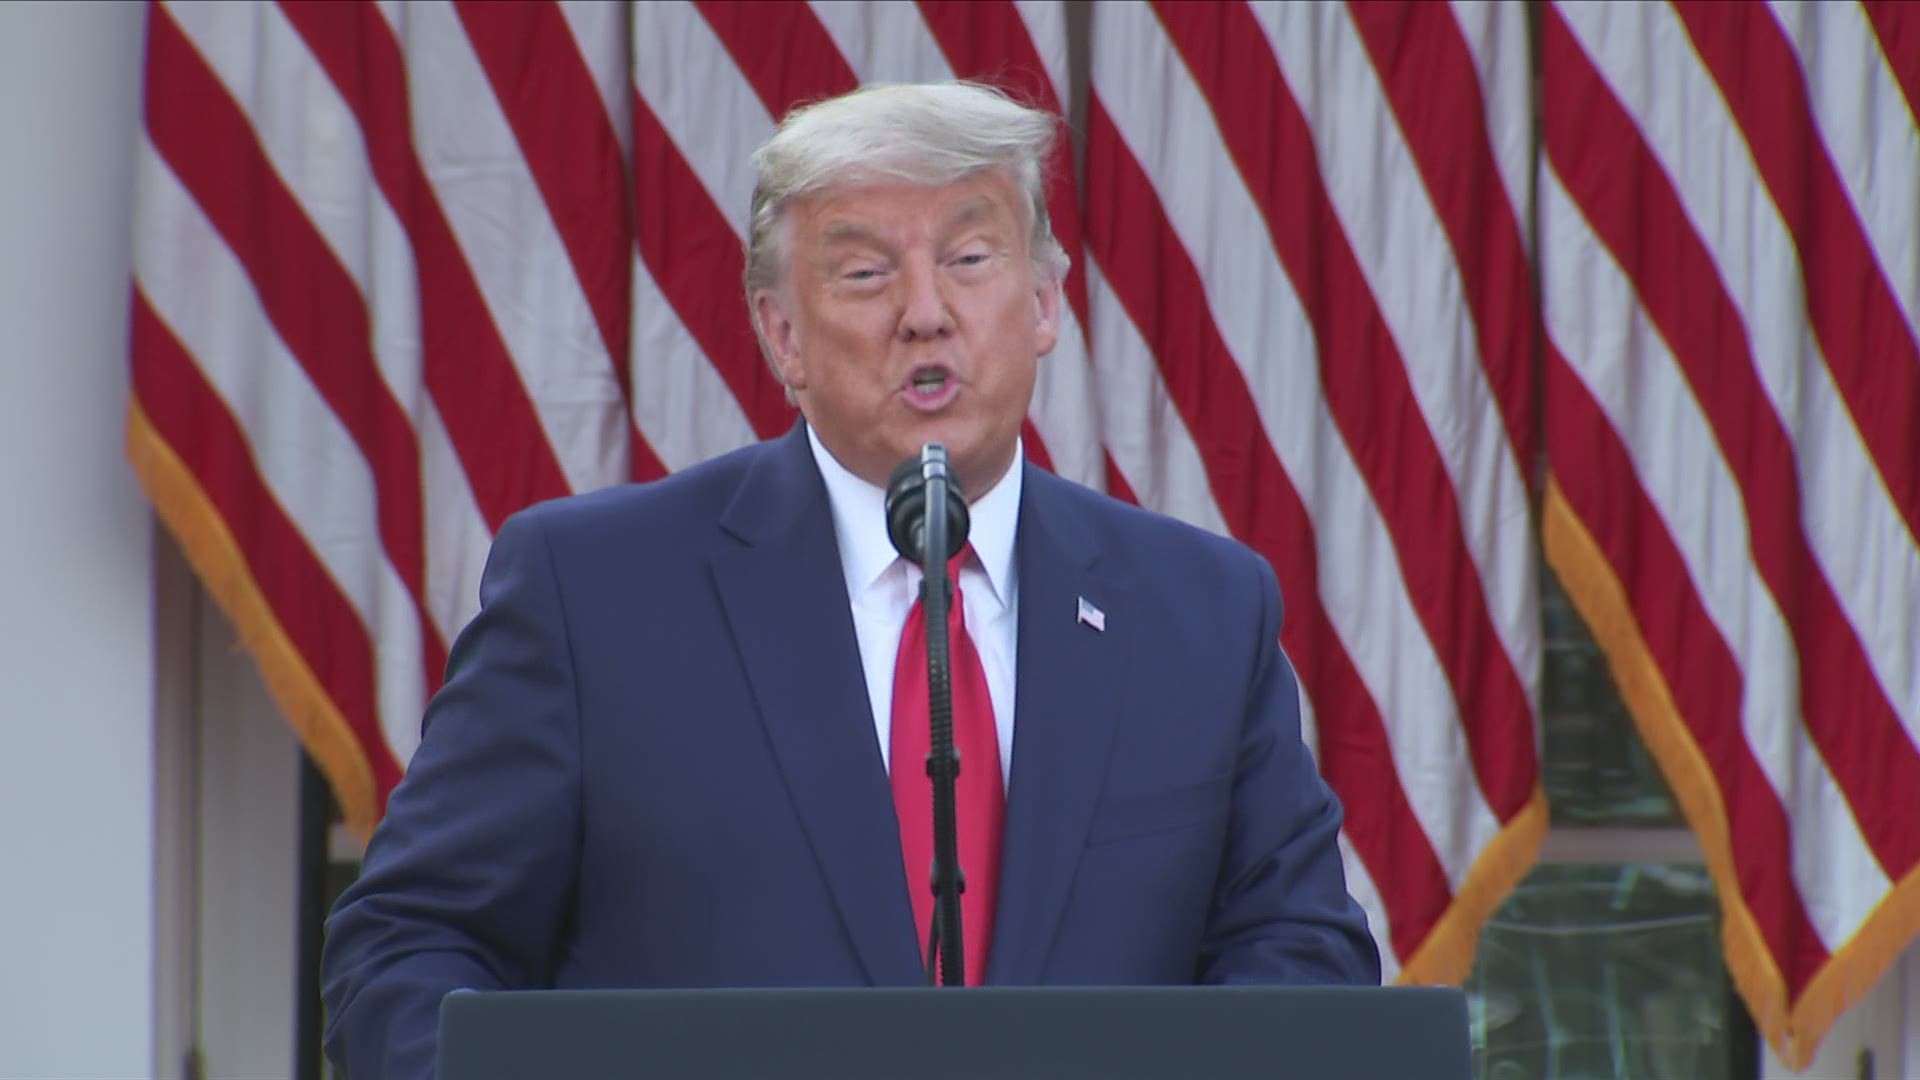 President Trump spoke from the White House Rose Garden on Friday giving details about Operation Warp Speed, the effort to get a coronavirus vaccine available.